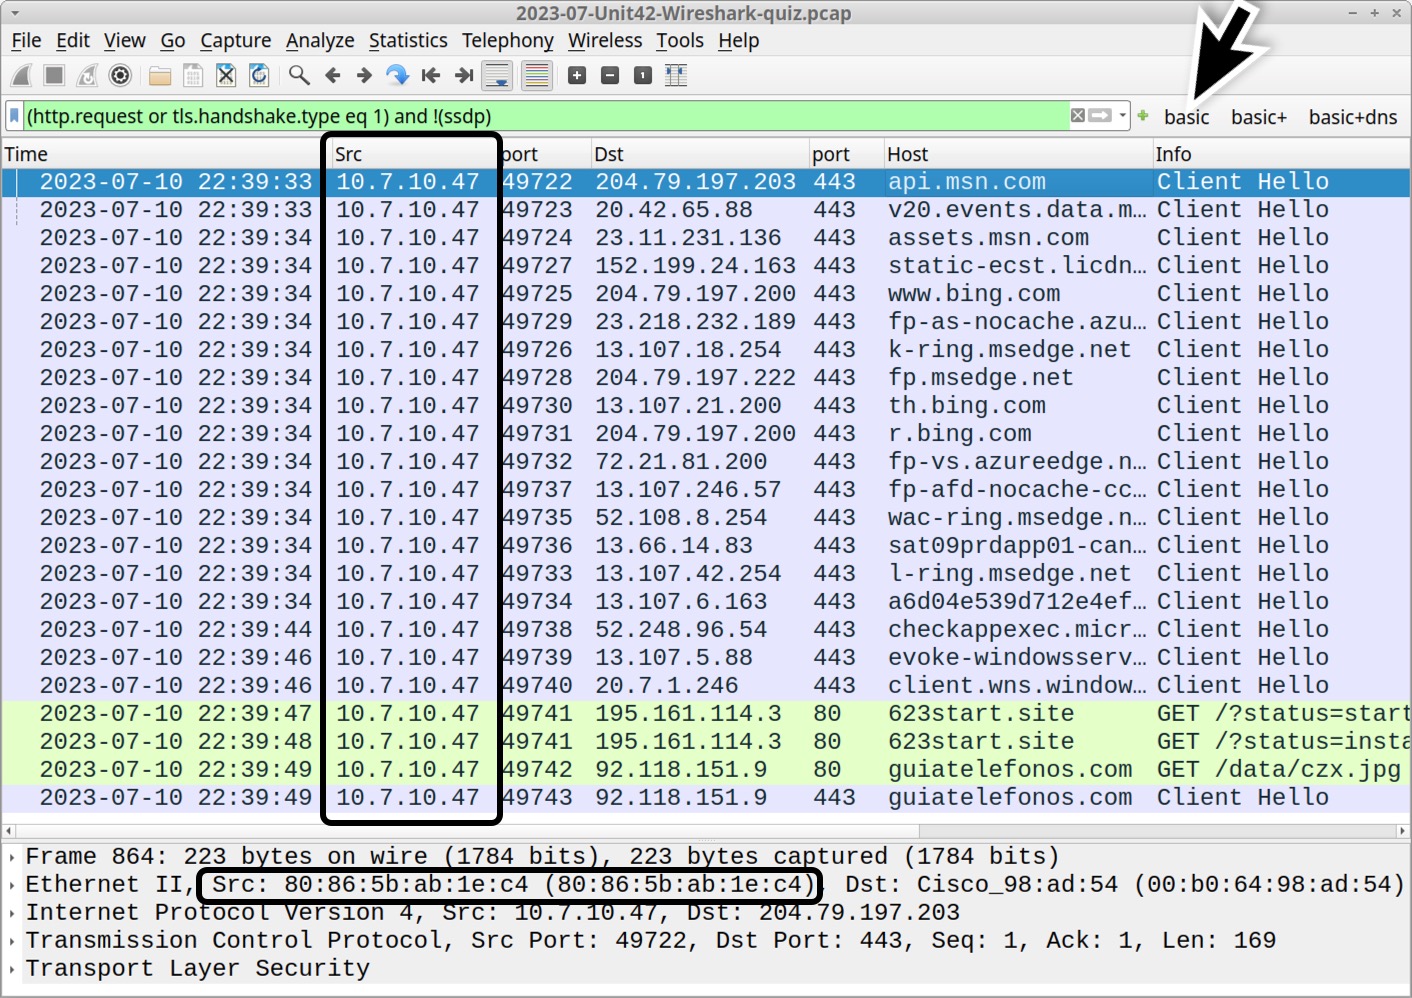 Image 1 is a screenshot of Wireshark. Highlighted in a black box in the Source column are the source addresses. A black arrow points to “basic” filter. Highlighted in a second black box on the bottom is a second address.